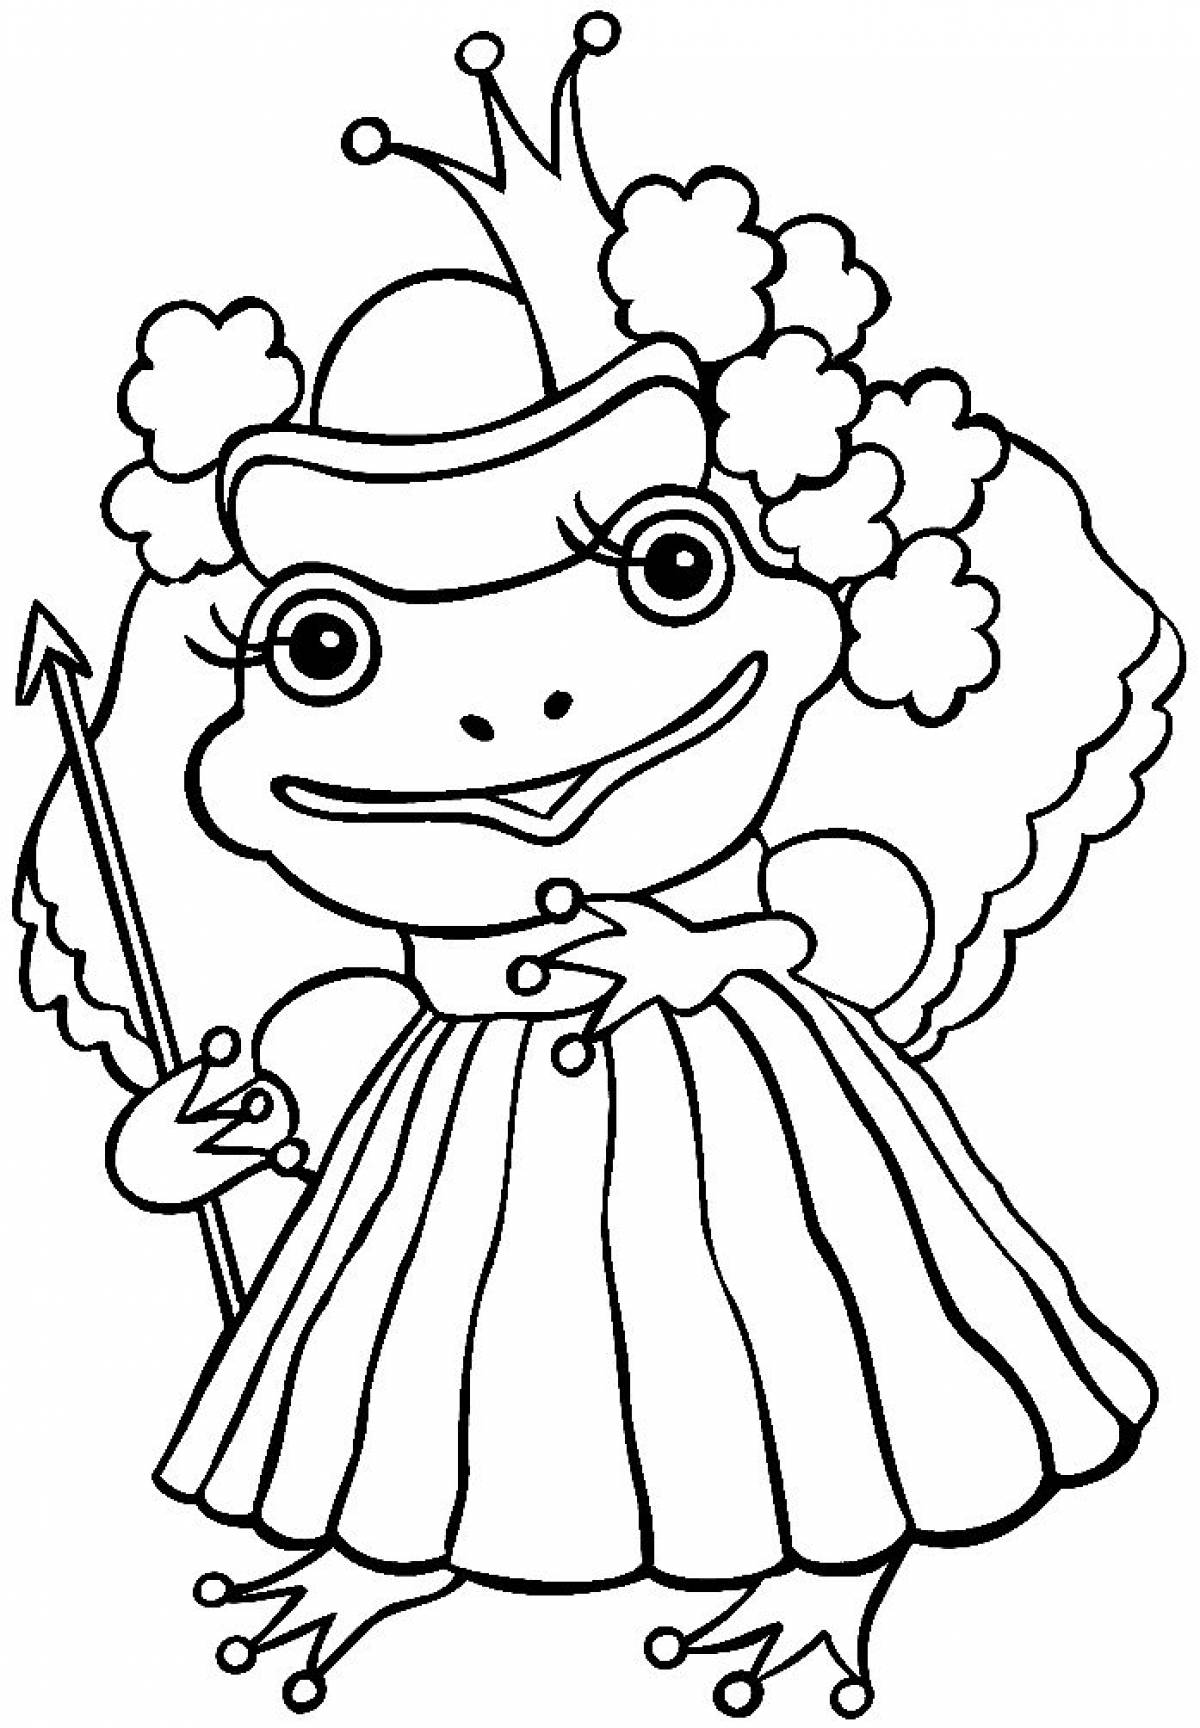 Princess frog in a dress